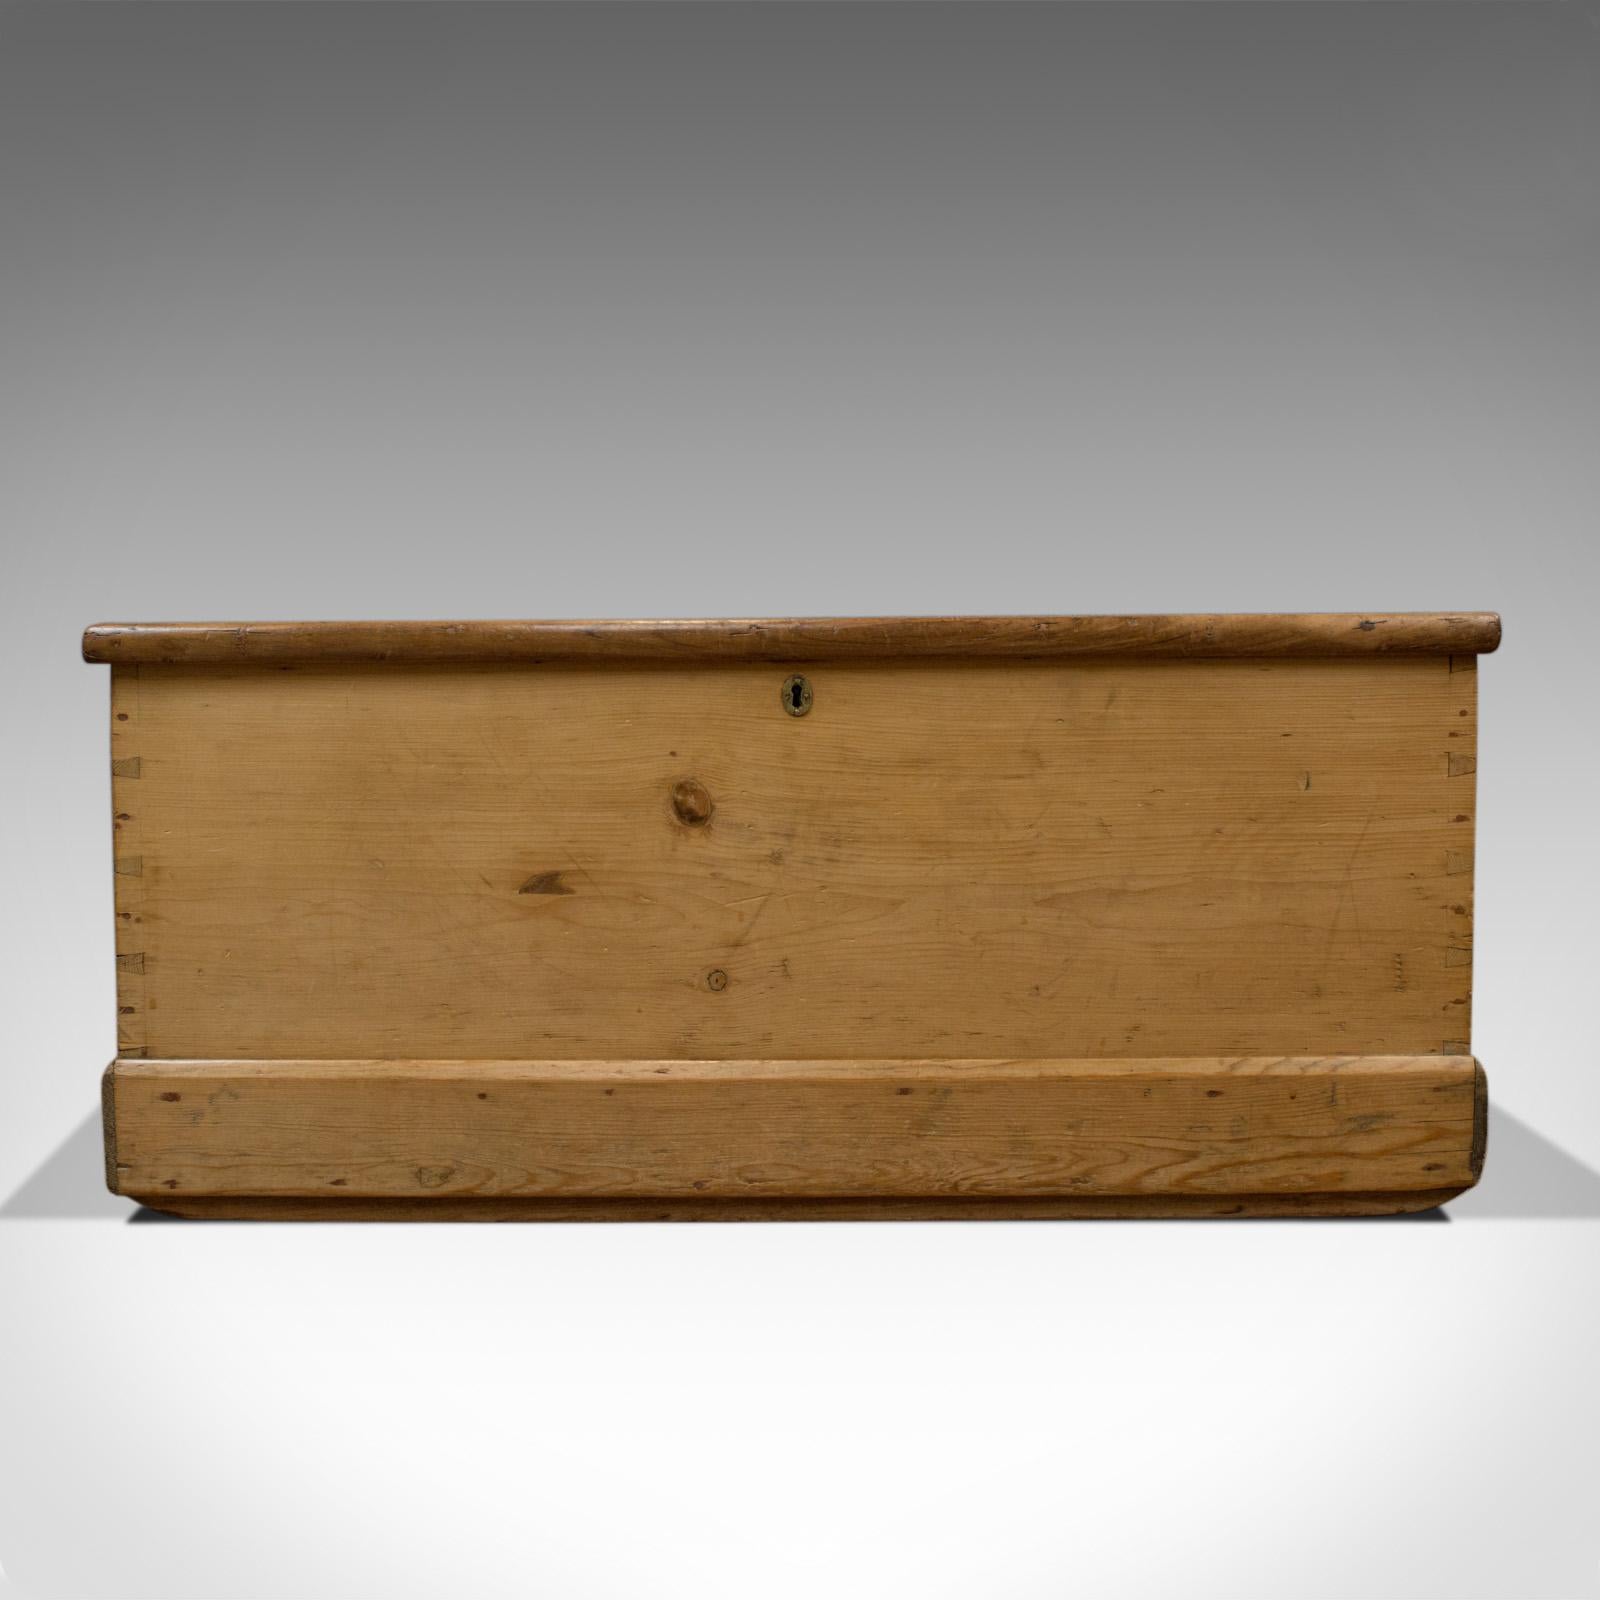 This is an antique shipwright's tool chest. An English, Victorian pine trunk dating to the mid 19th century, circa 1850.

Crafted in antique pine displaying grain interest throughout
Good consistent colour and a desirable aged patina
Opening lid